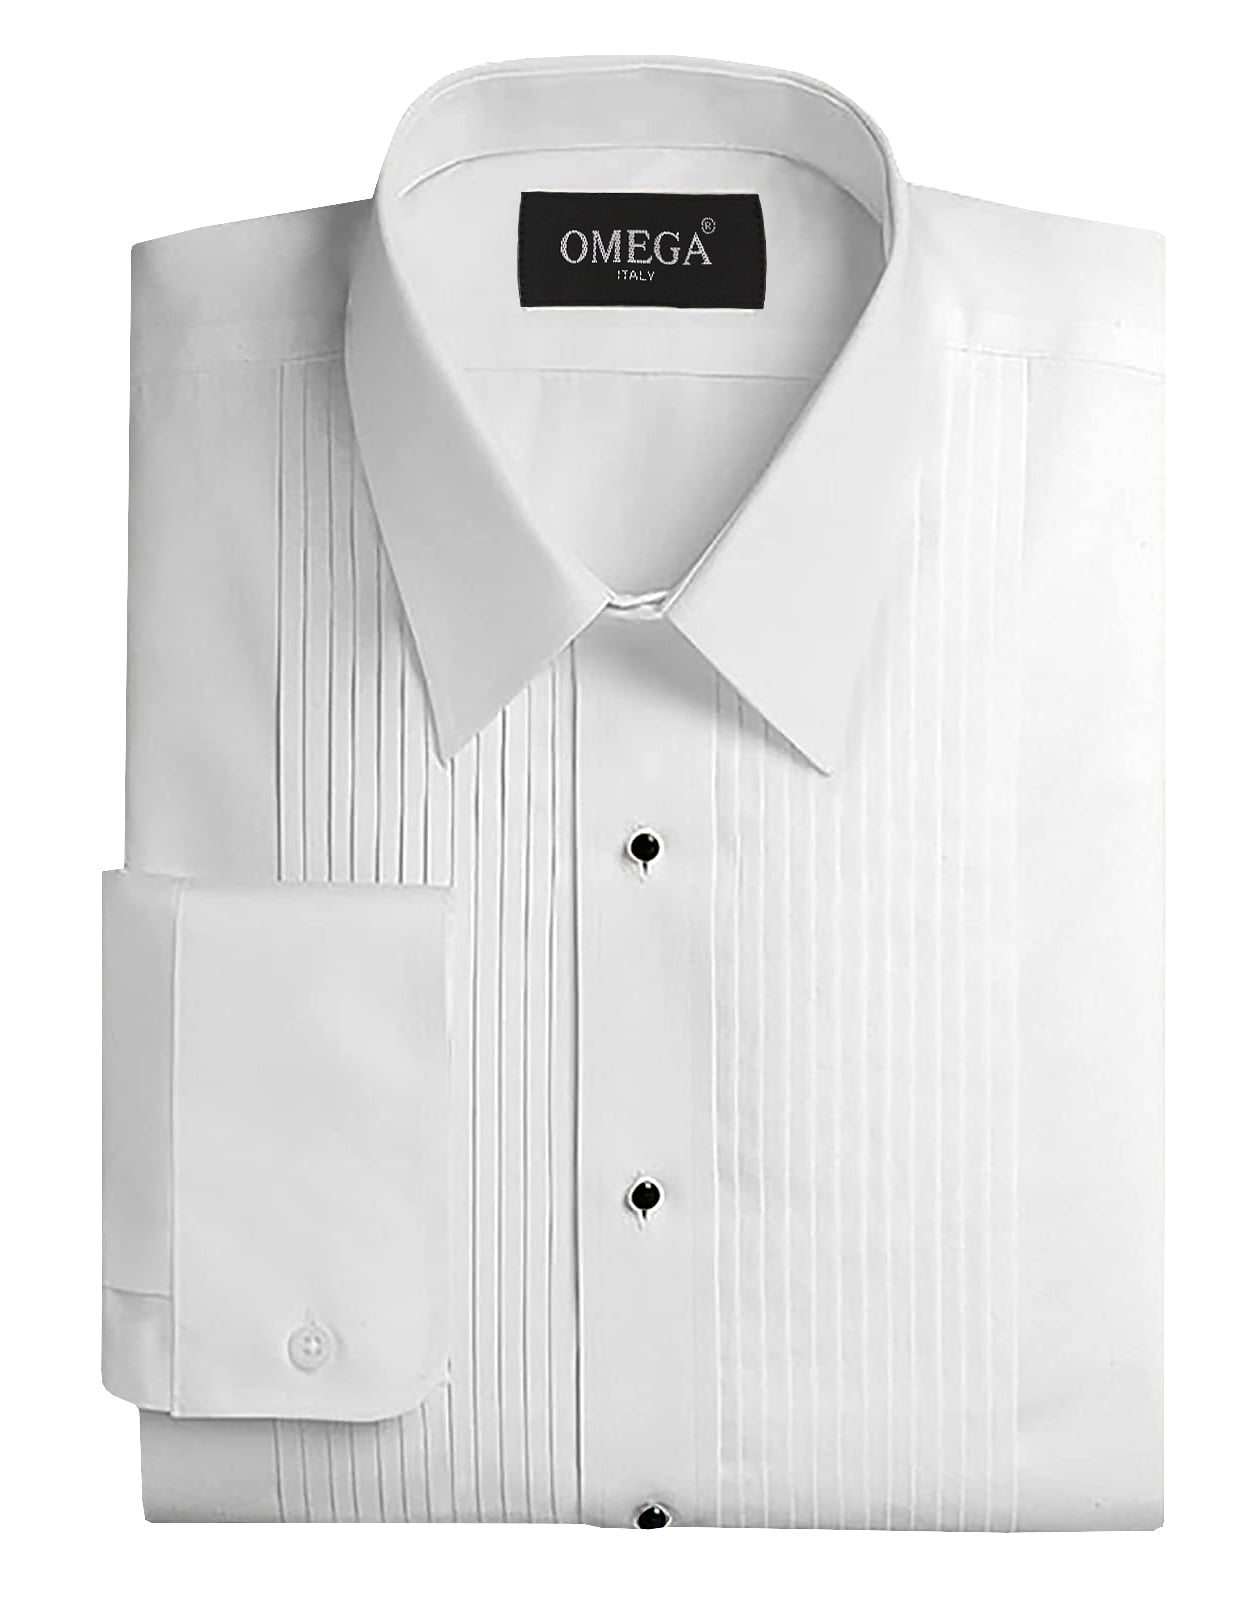 New Men's White Tuxedo Shirt Wing or Laydown Collar Standard Cuffs Pleated Front 